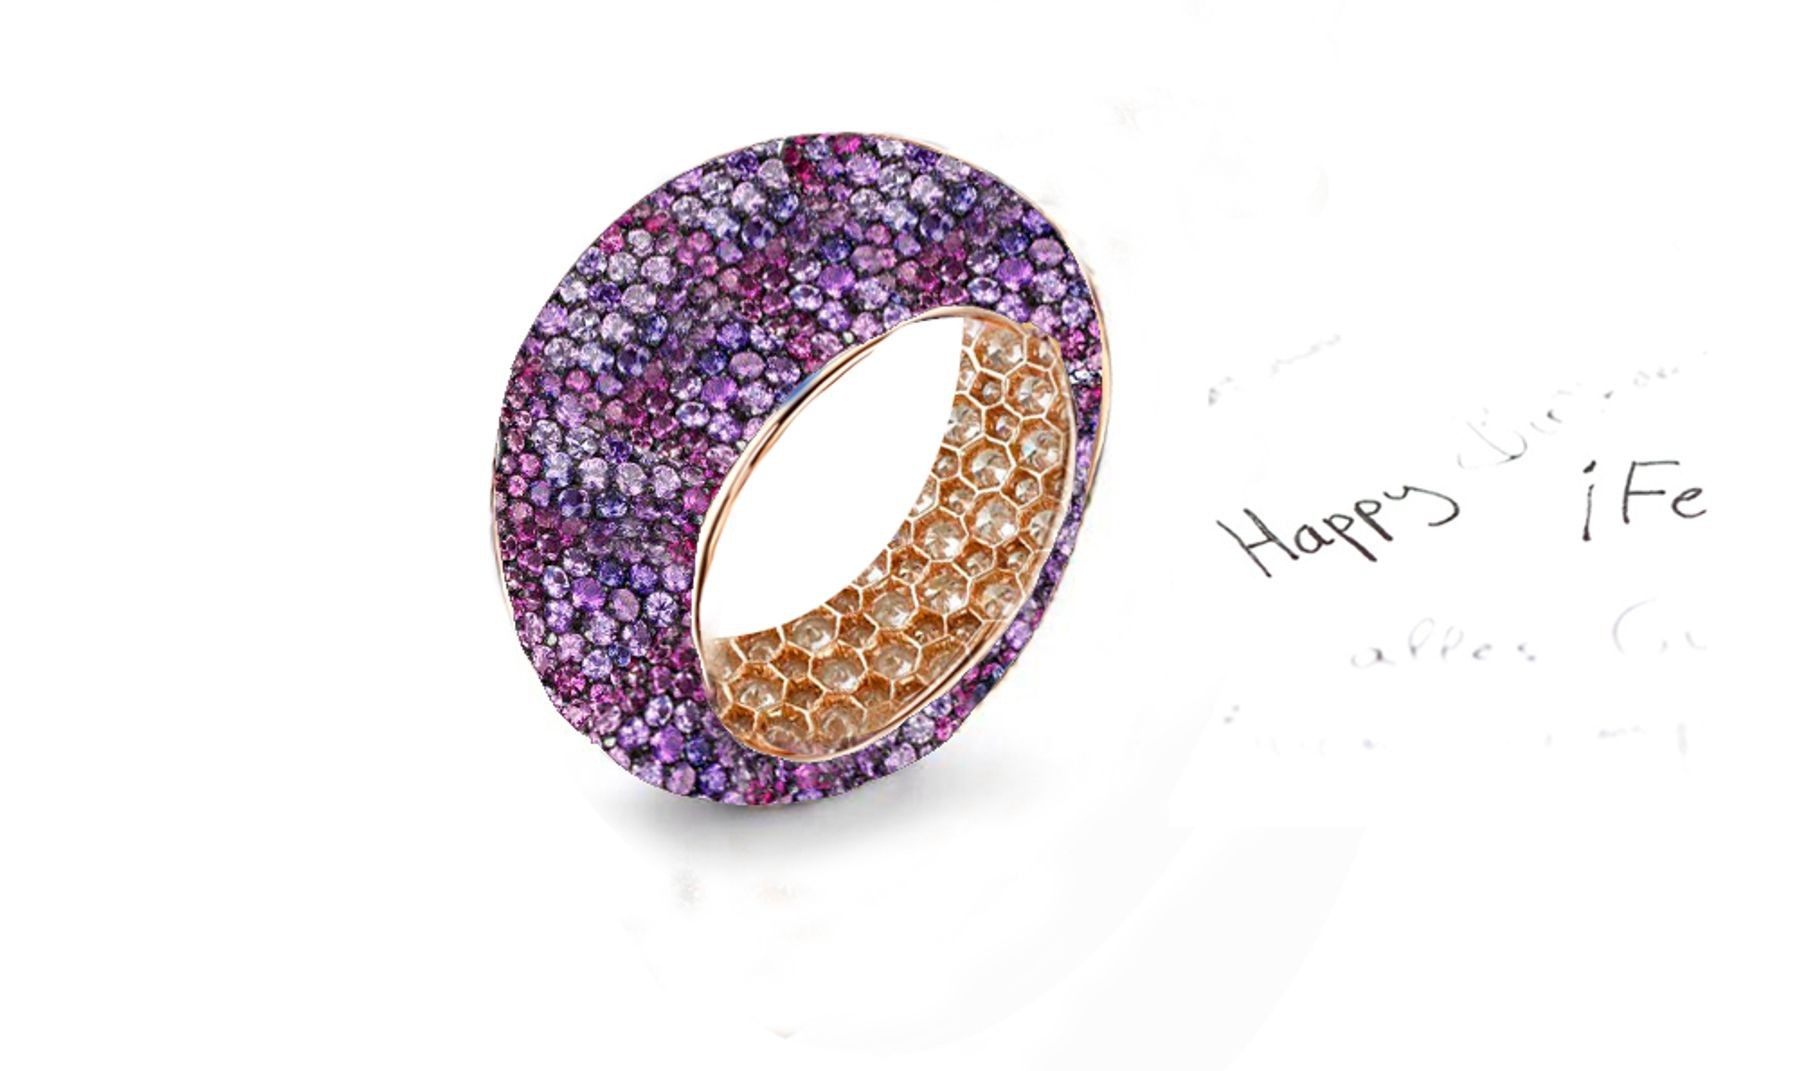 Declare Your Lasting Love With Custom Manufactured Diamonds & Colored Gemstones Eternity Rings & Bands